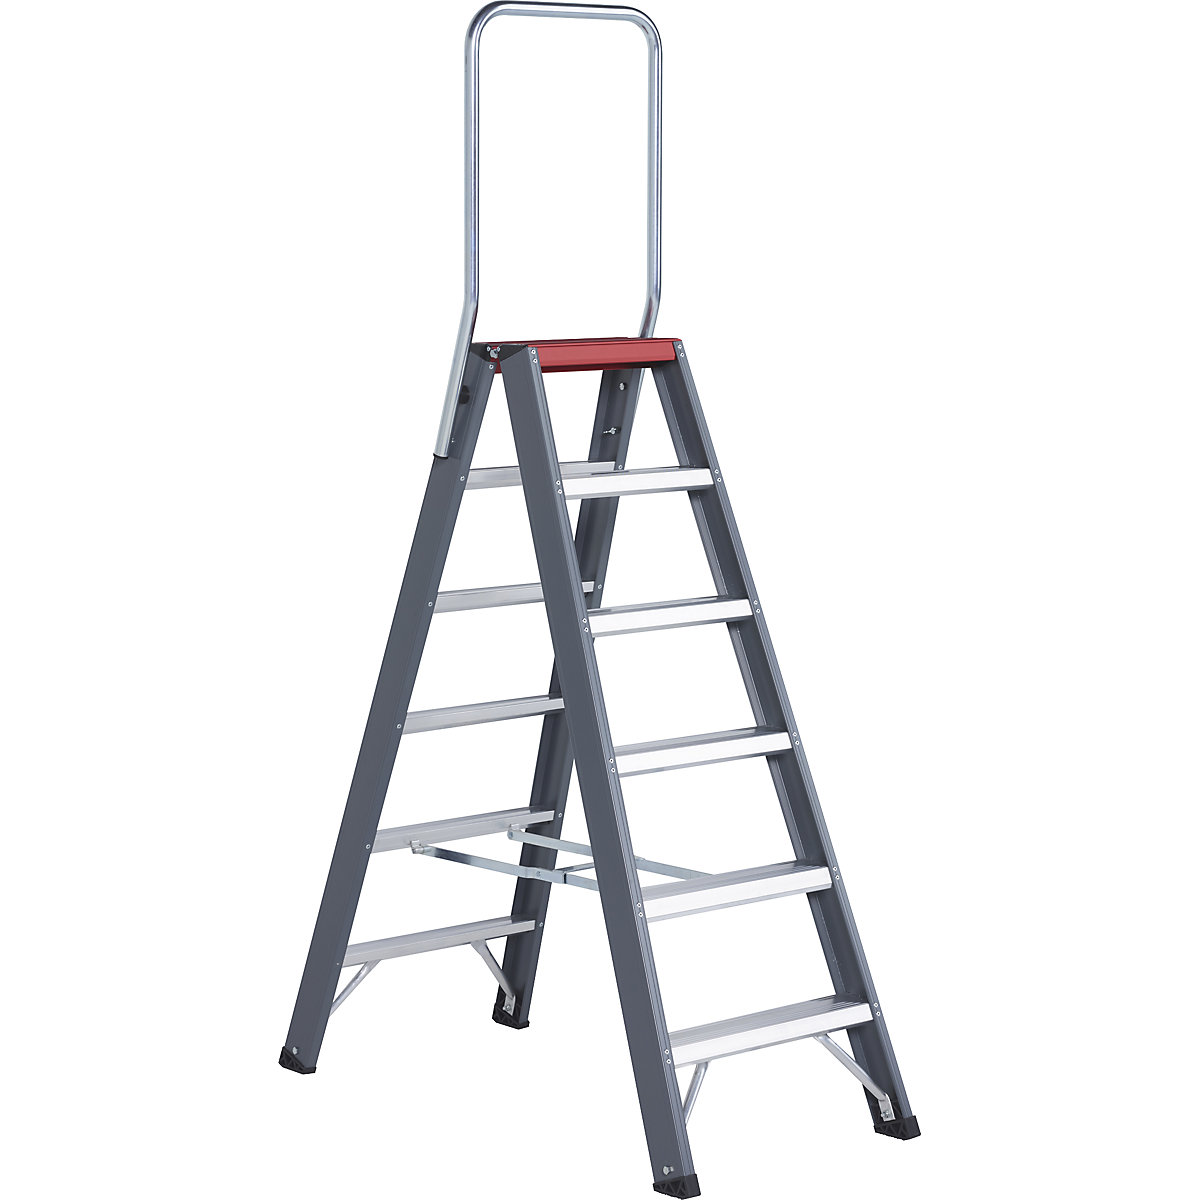 Aluminium step ladder – Altrex, double sided access, 2 x 6 steps, working height 3400 mm-2